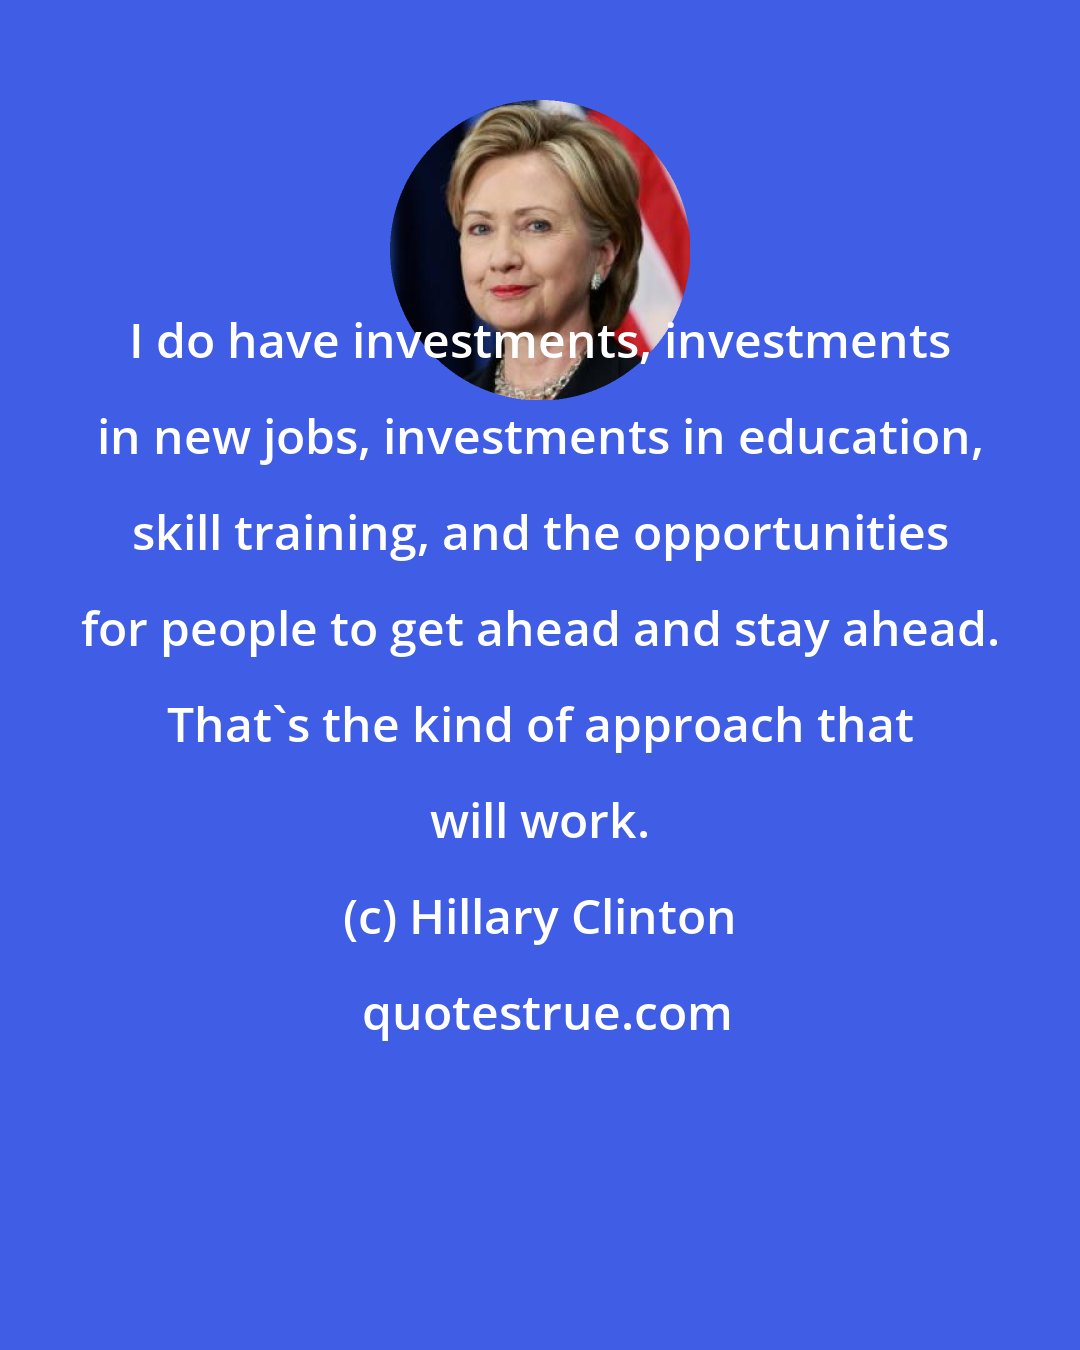 Hillary Clinton: I do have investments, investments in new jobs, investments in education, skill training, and the opportunities for people to get ahead and stay ahead. That's the kind of approach that will work.